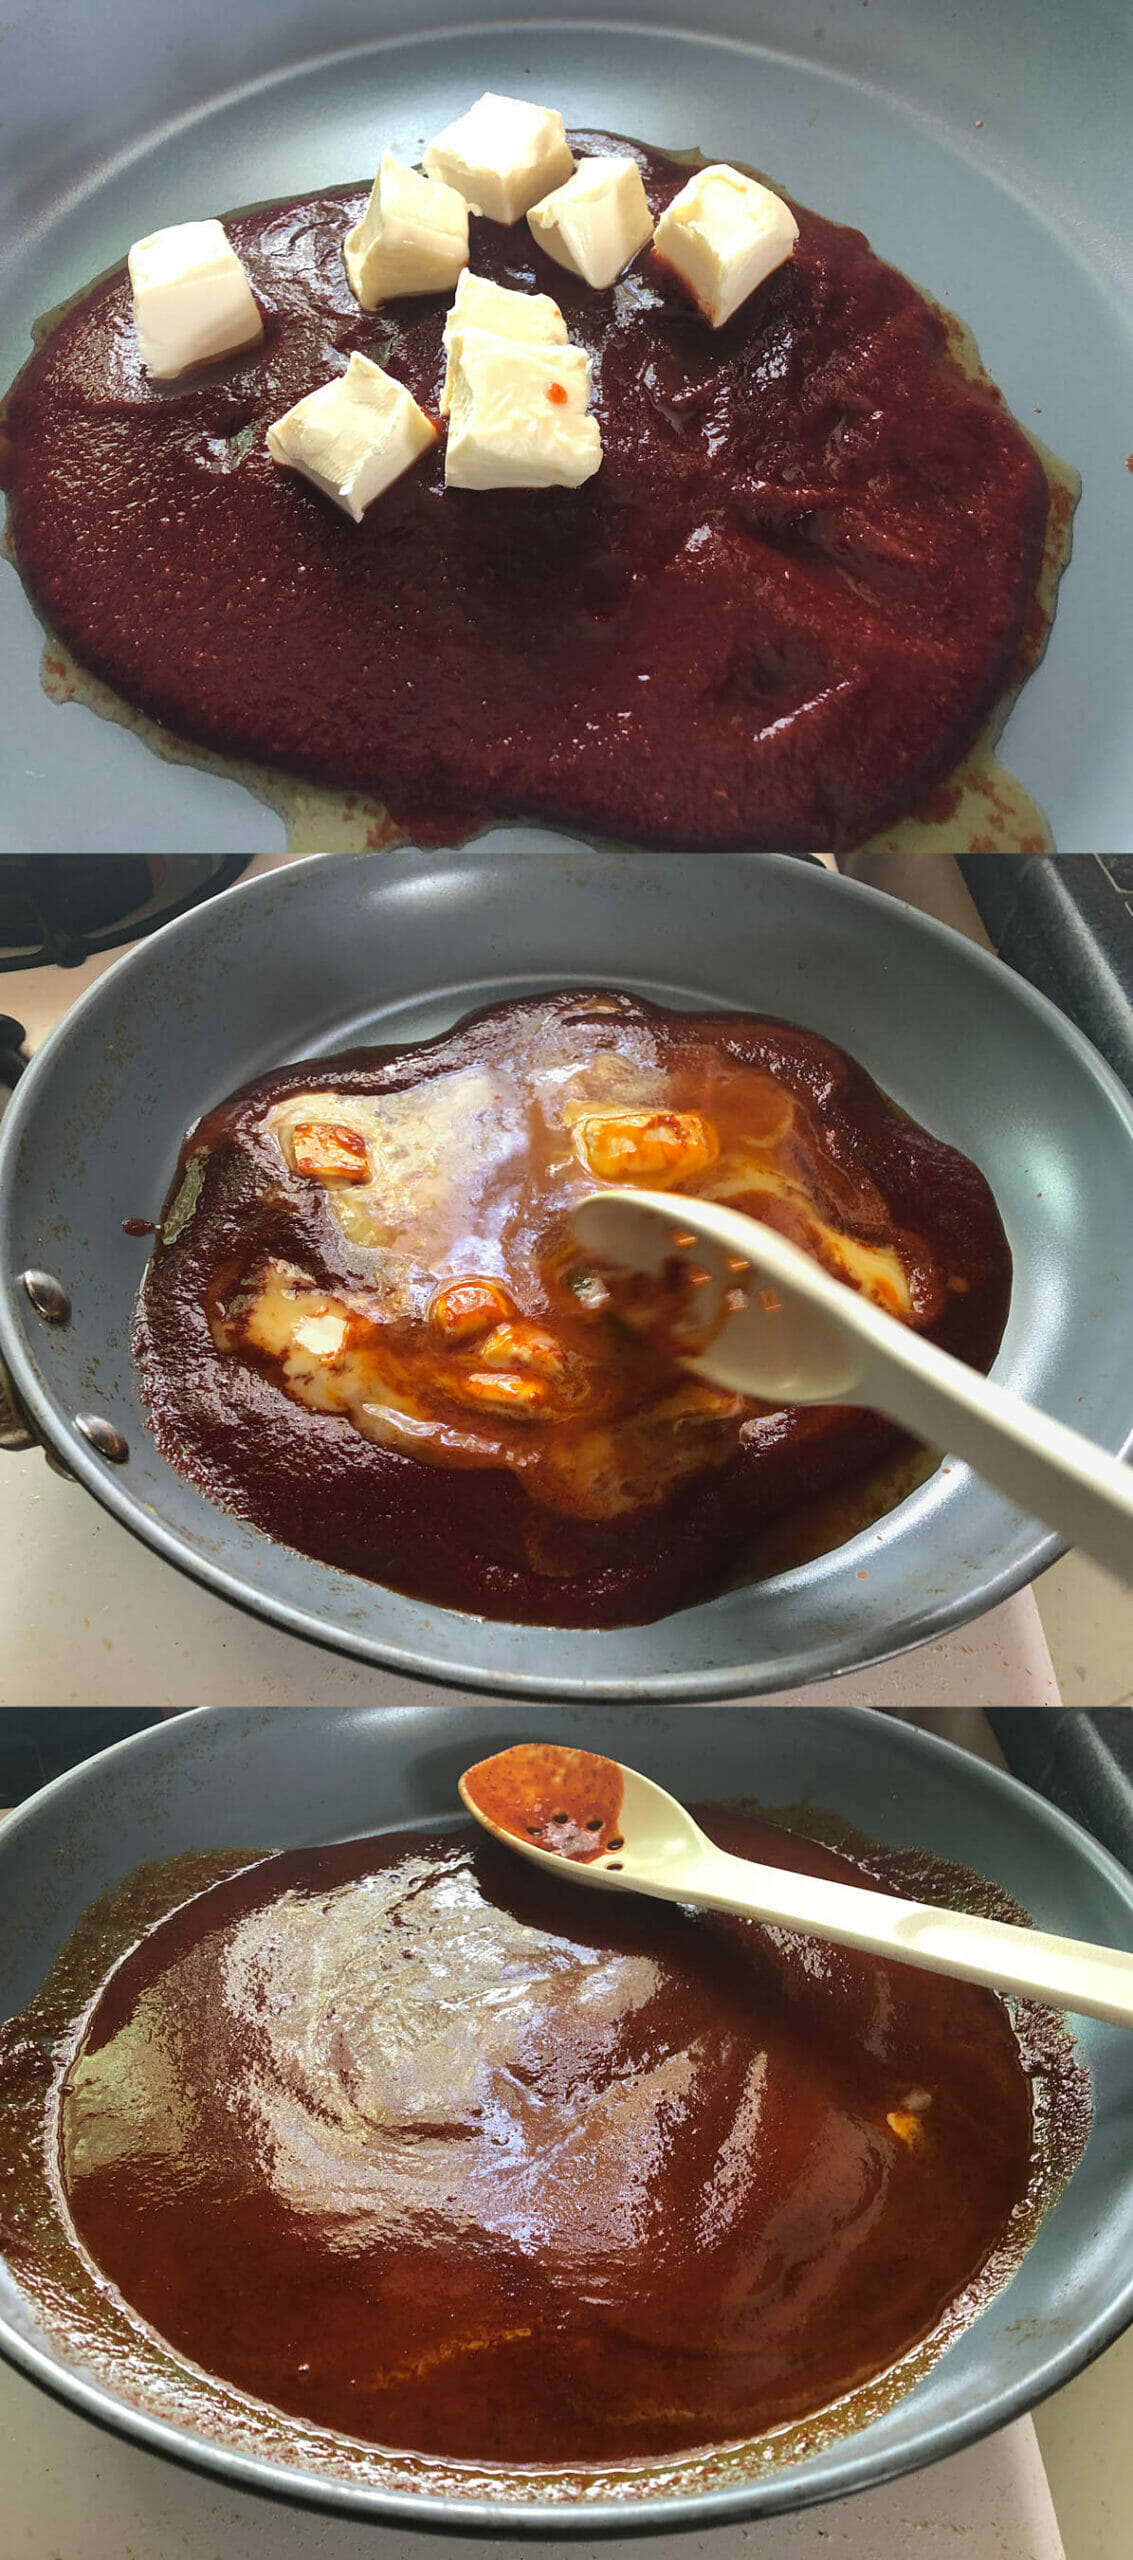 Vegan butter in a saucepan with hot sauce, then being melted and cooked through.